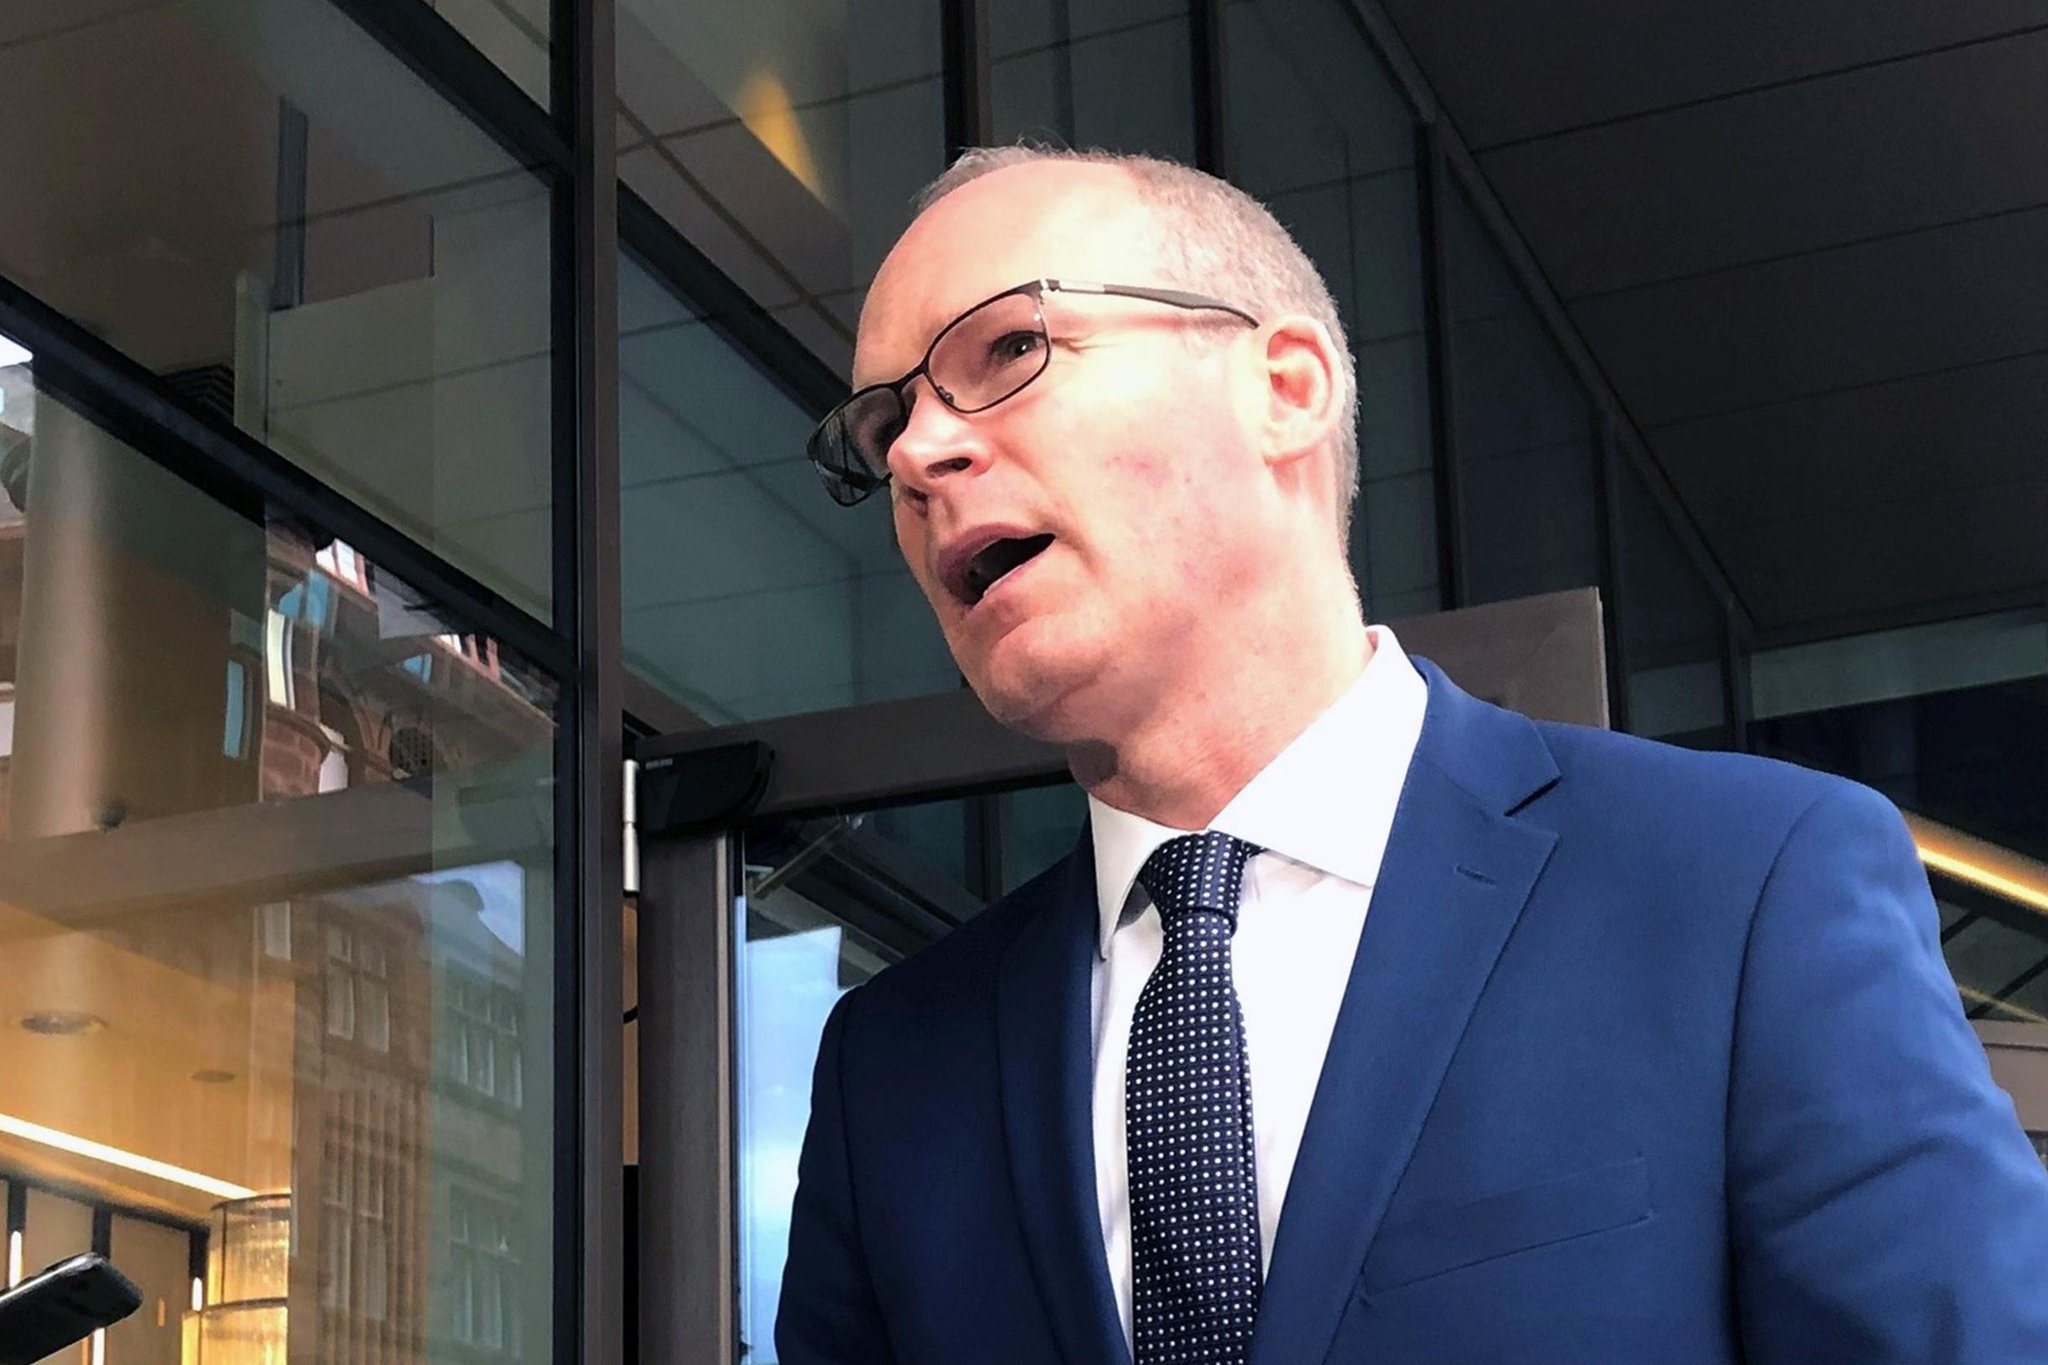 Northern Ireland Protocol: Simon Coveney plays down chances of breakthrough in negotiations on post-Brexit trade arrangements